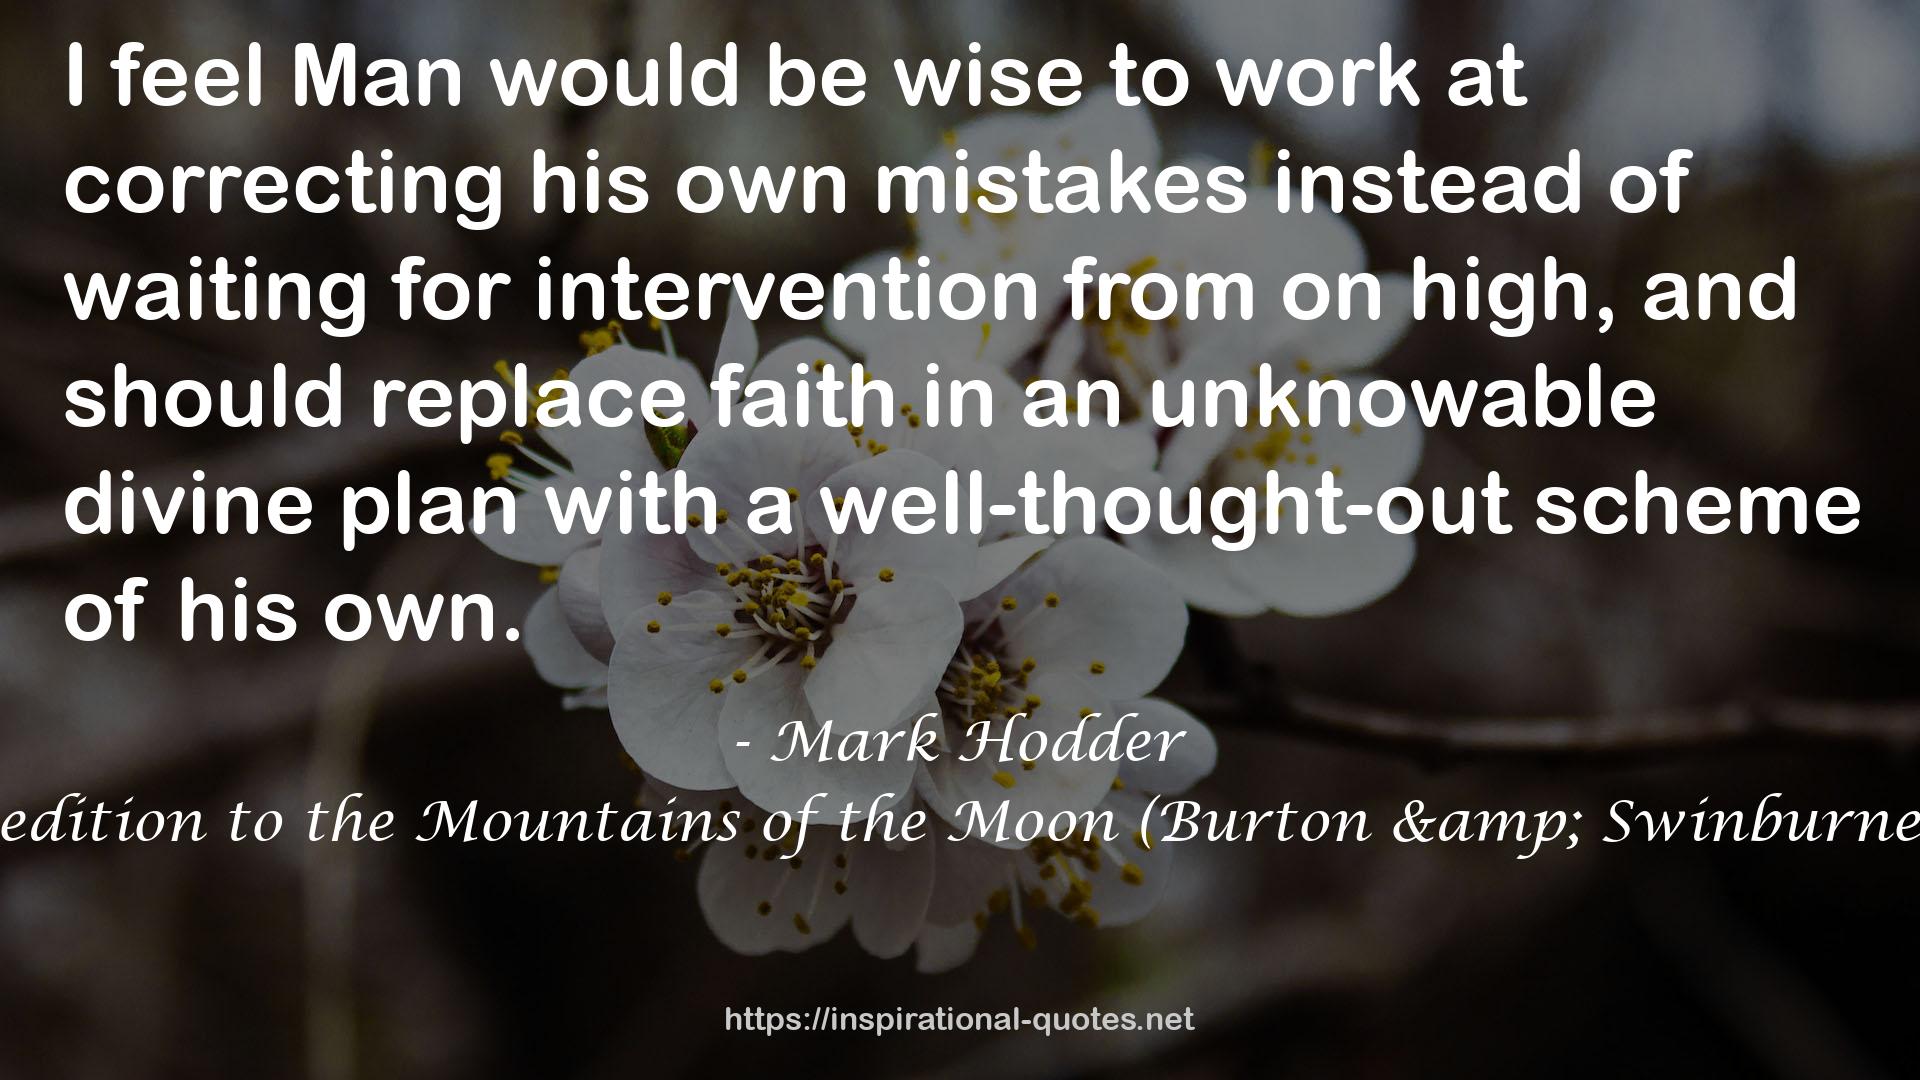 Expedition to the Mountains of the Moon (Burton & Swinburne, #3) QUOTES